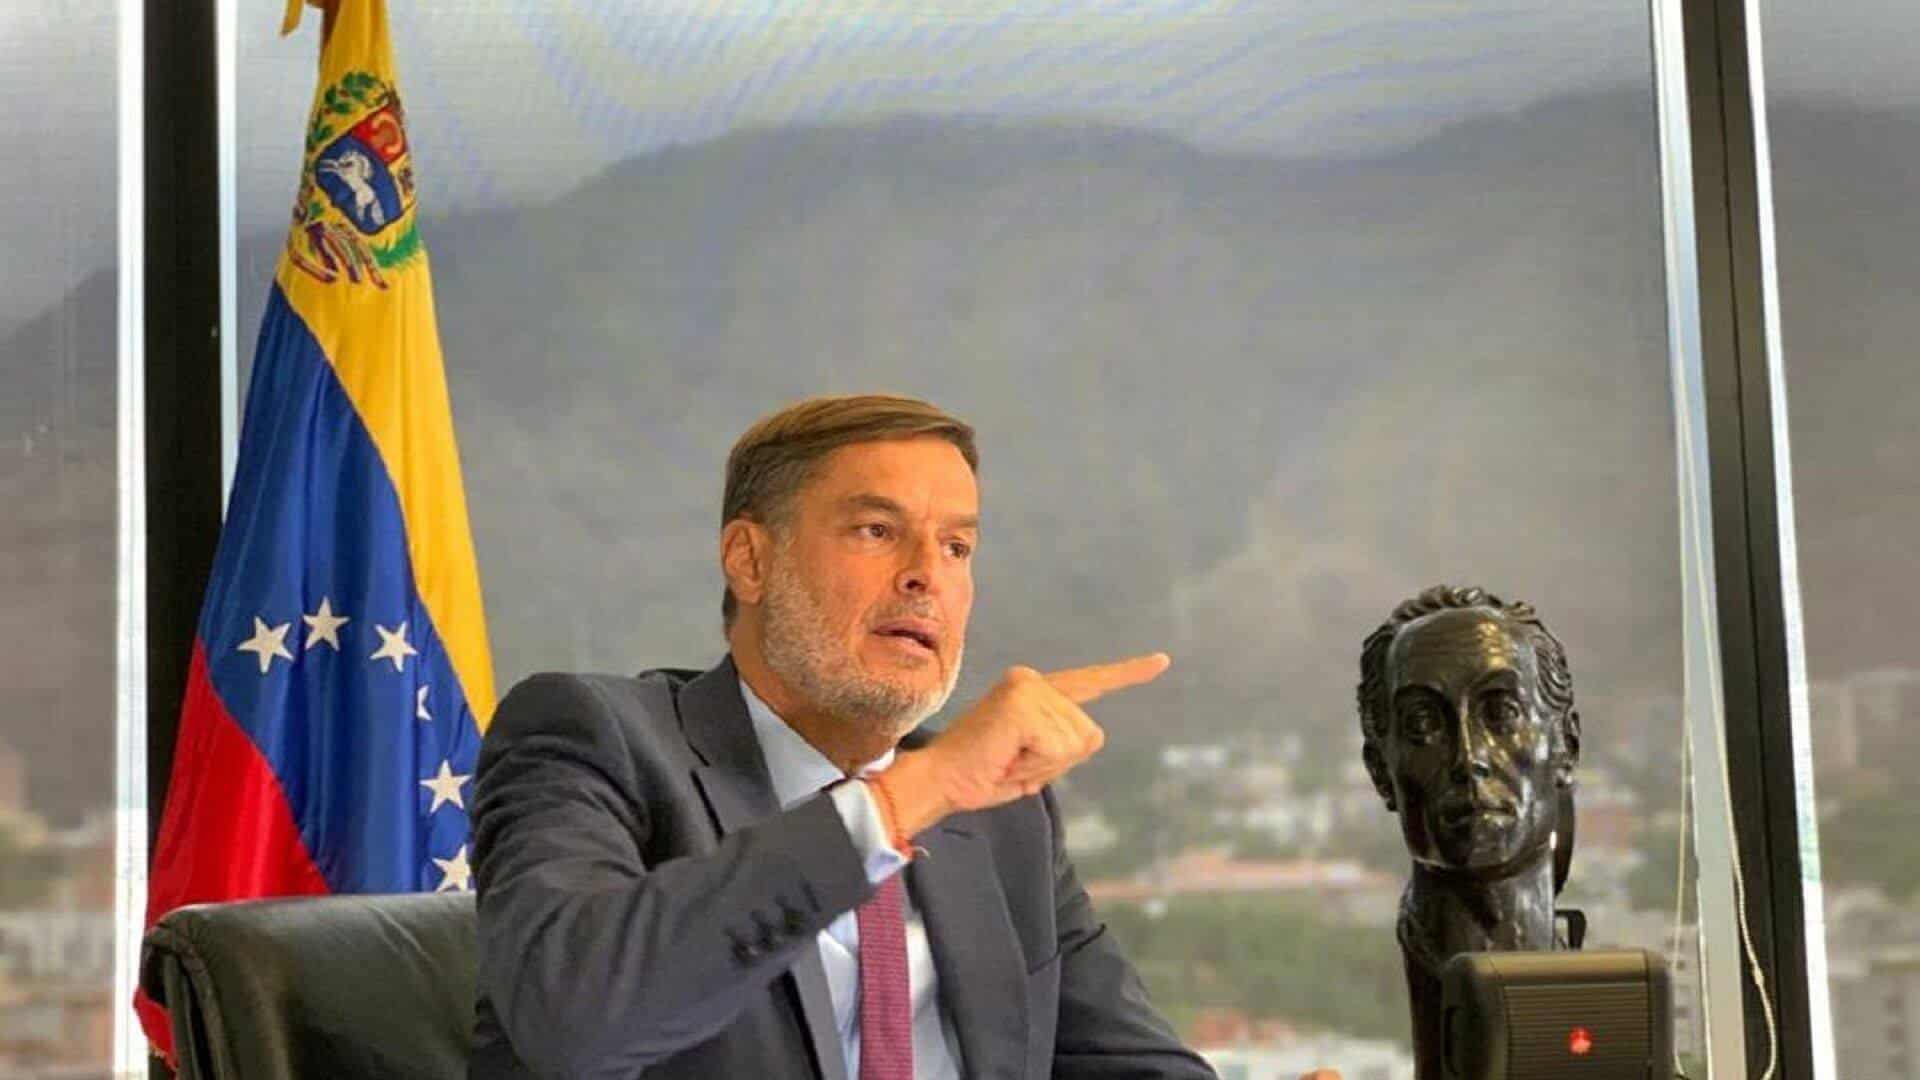 Félix Plasencia, the new Venezuelan ambassador to Colombia and former minister for foreign affairs, next to a sculpture of Simon Bolivar and the Venezuelan flag in an office showing the Warairarepano mountain of Caracas in the background. File photo.